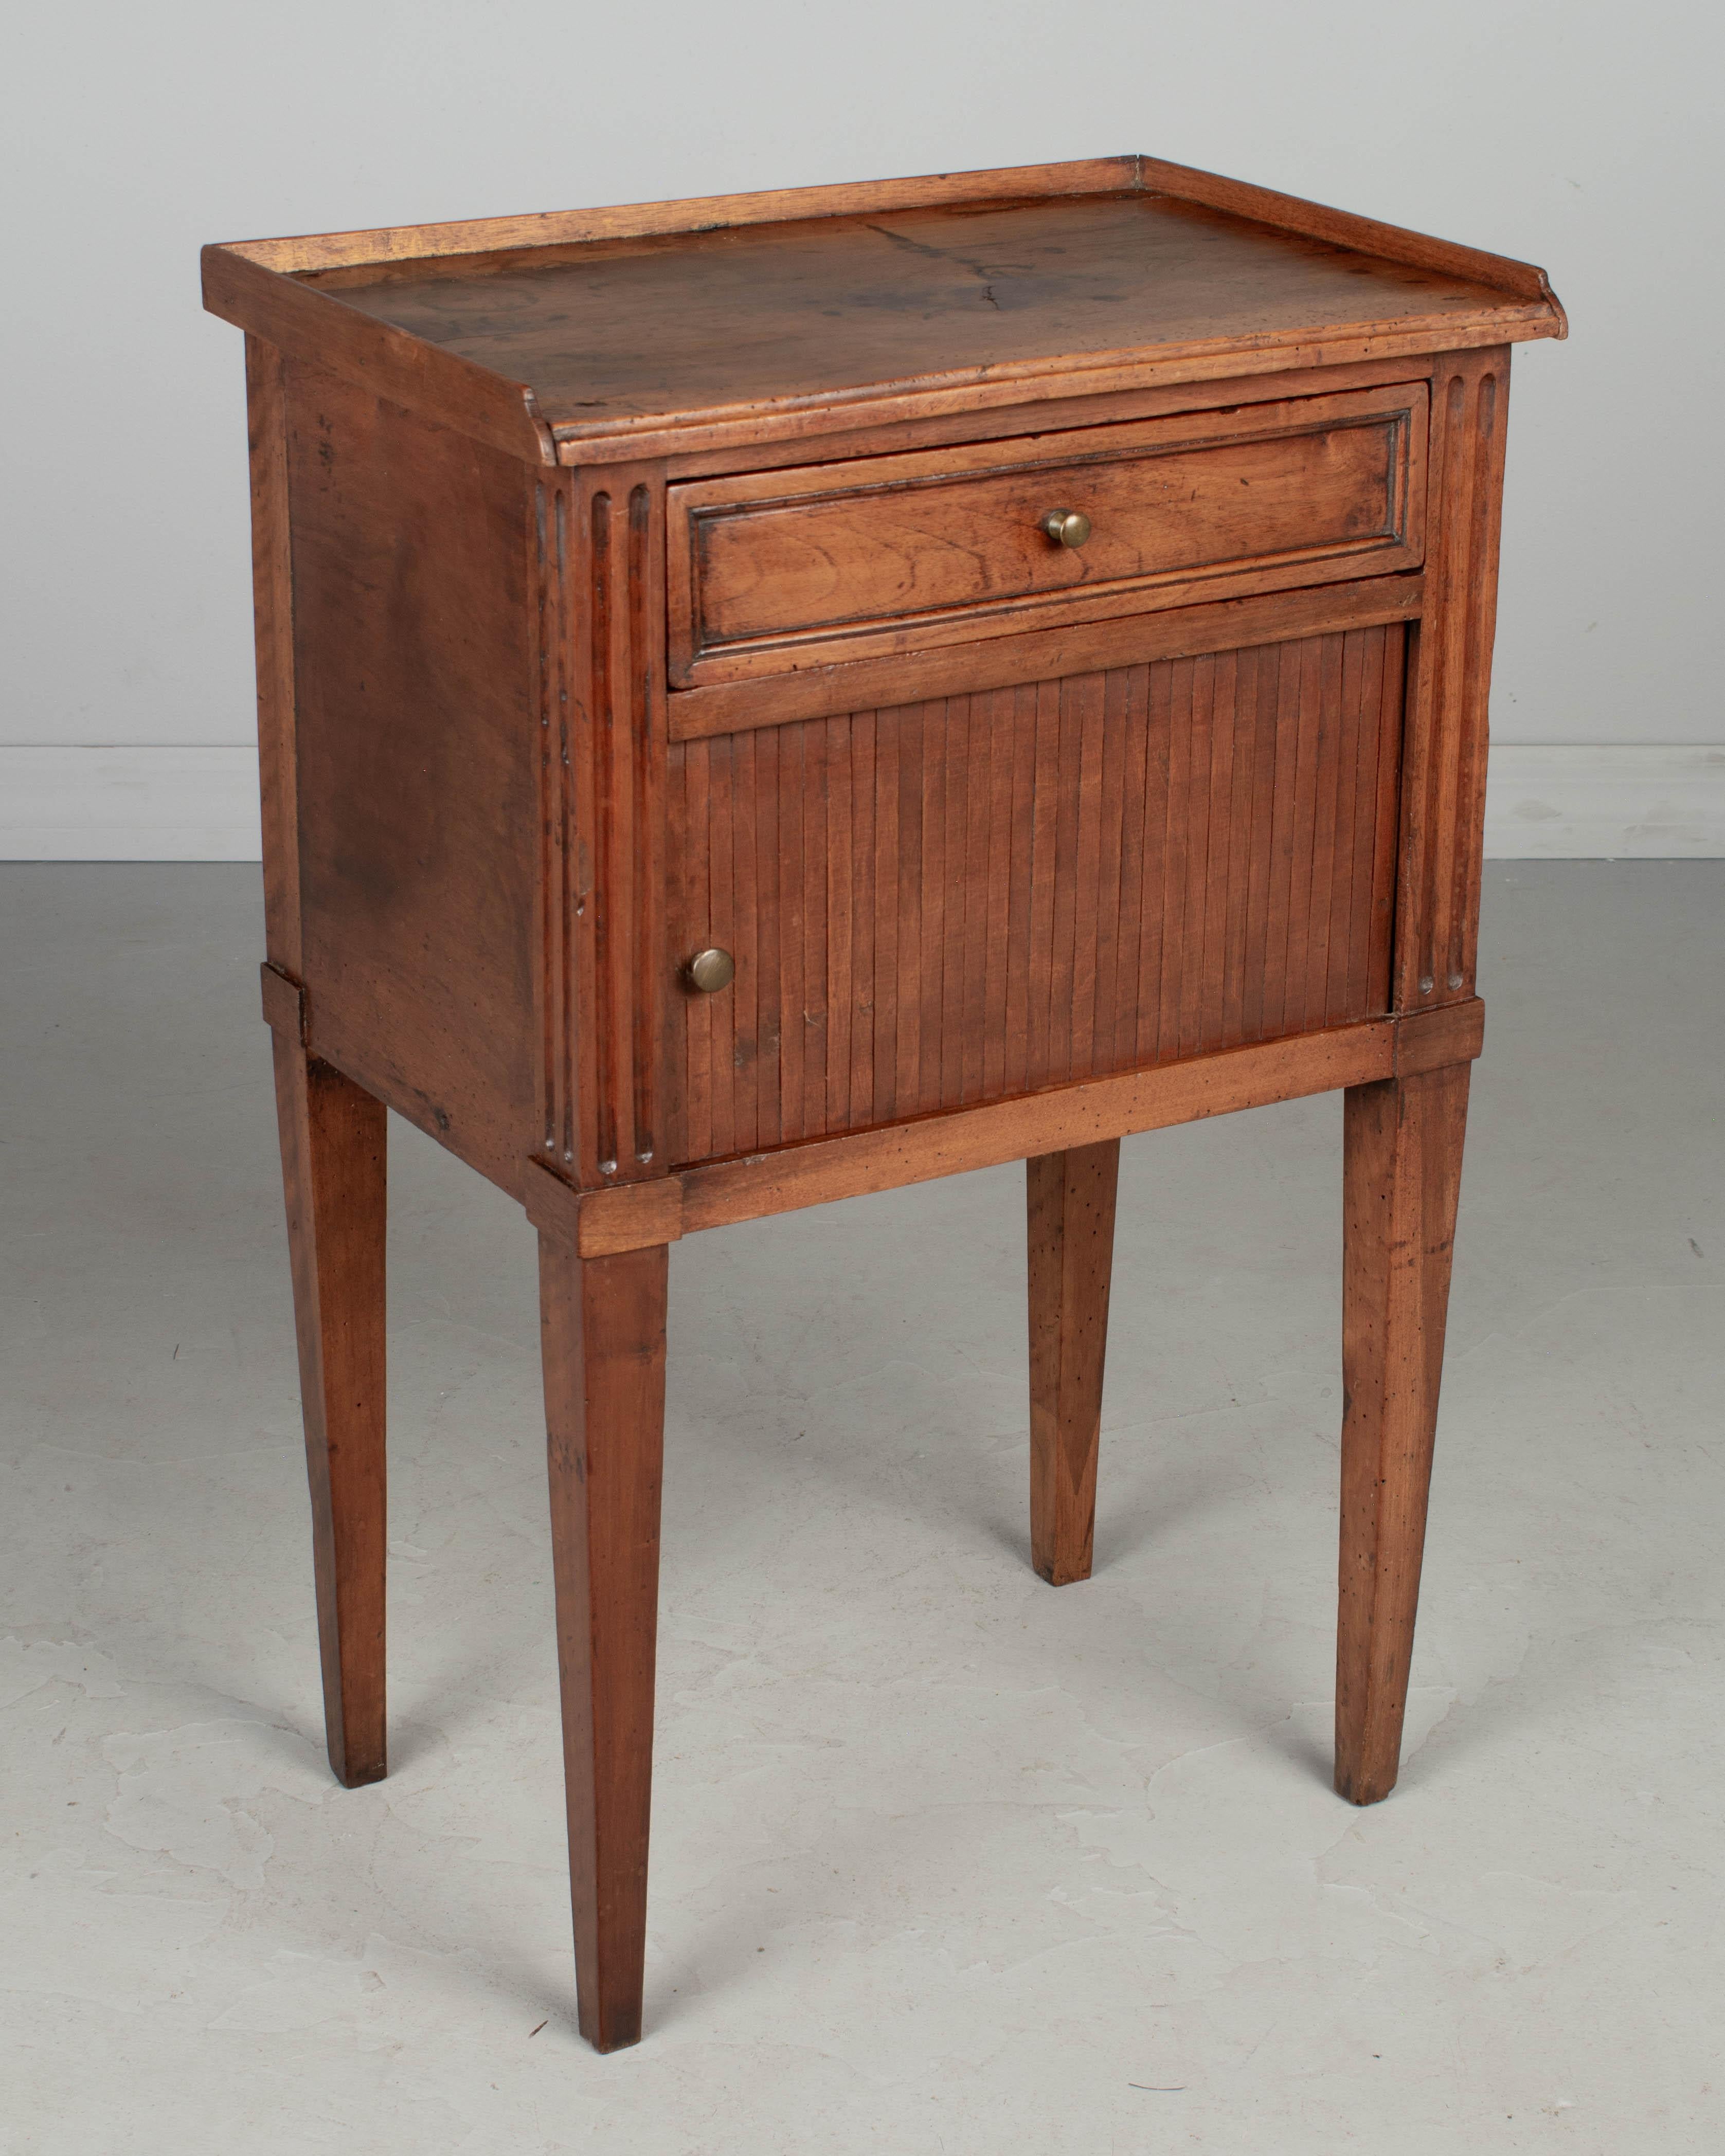 A 19th century French Country walnut side table or nightstand with a tambour door, dovetailed drawer and tapered legs. Brass knobs. Waxed patina. All original. Back right leg restored. Circa 1860-1880.   18.25